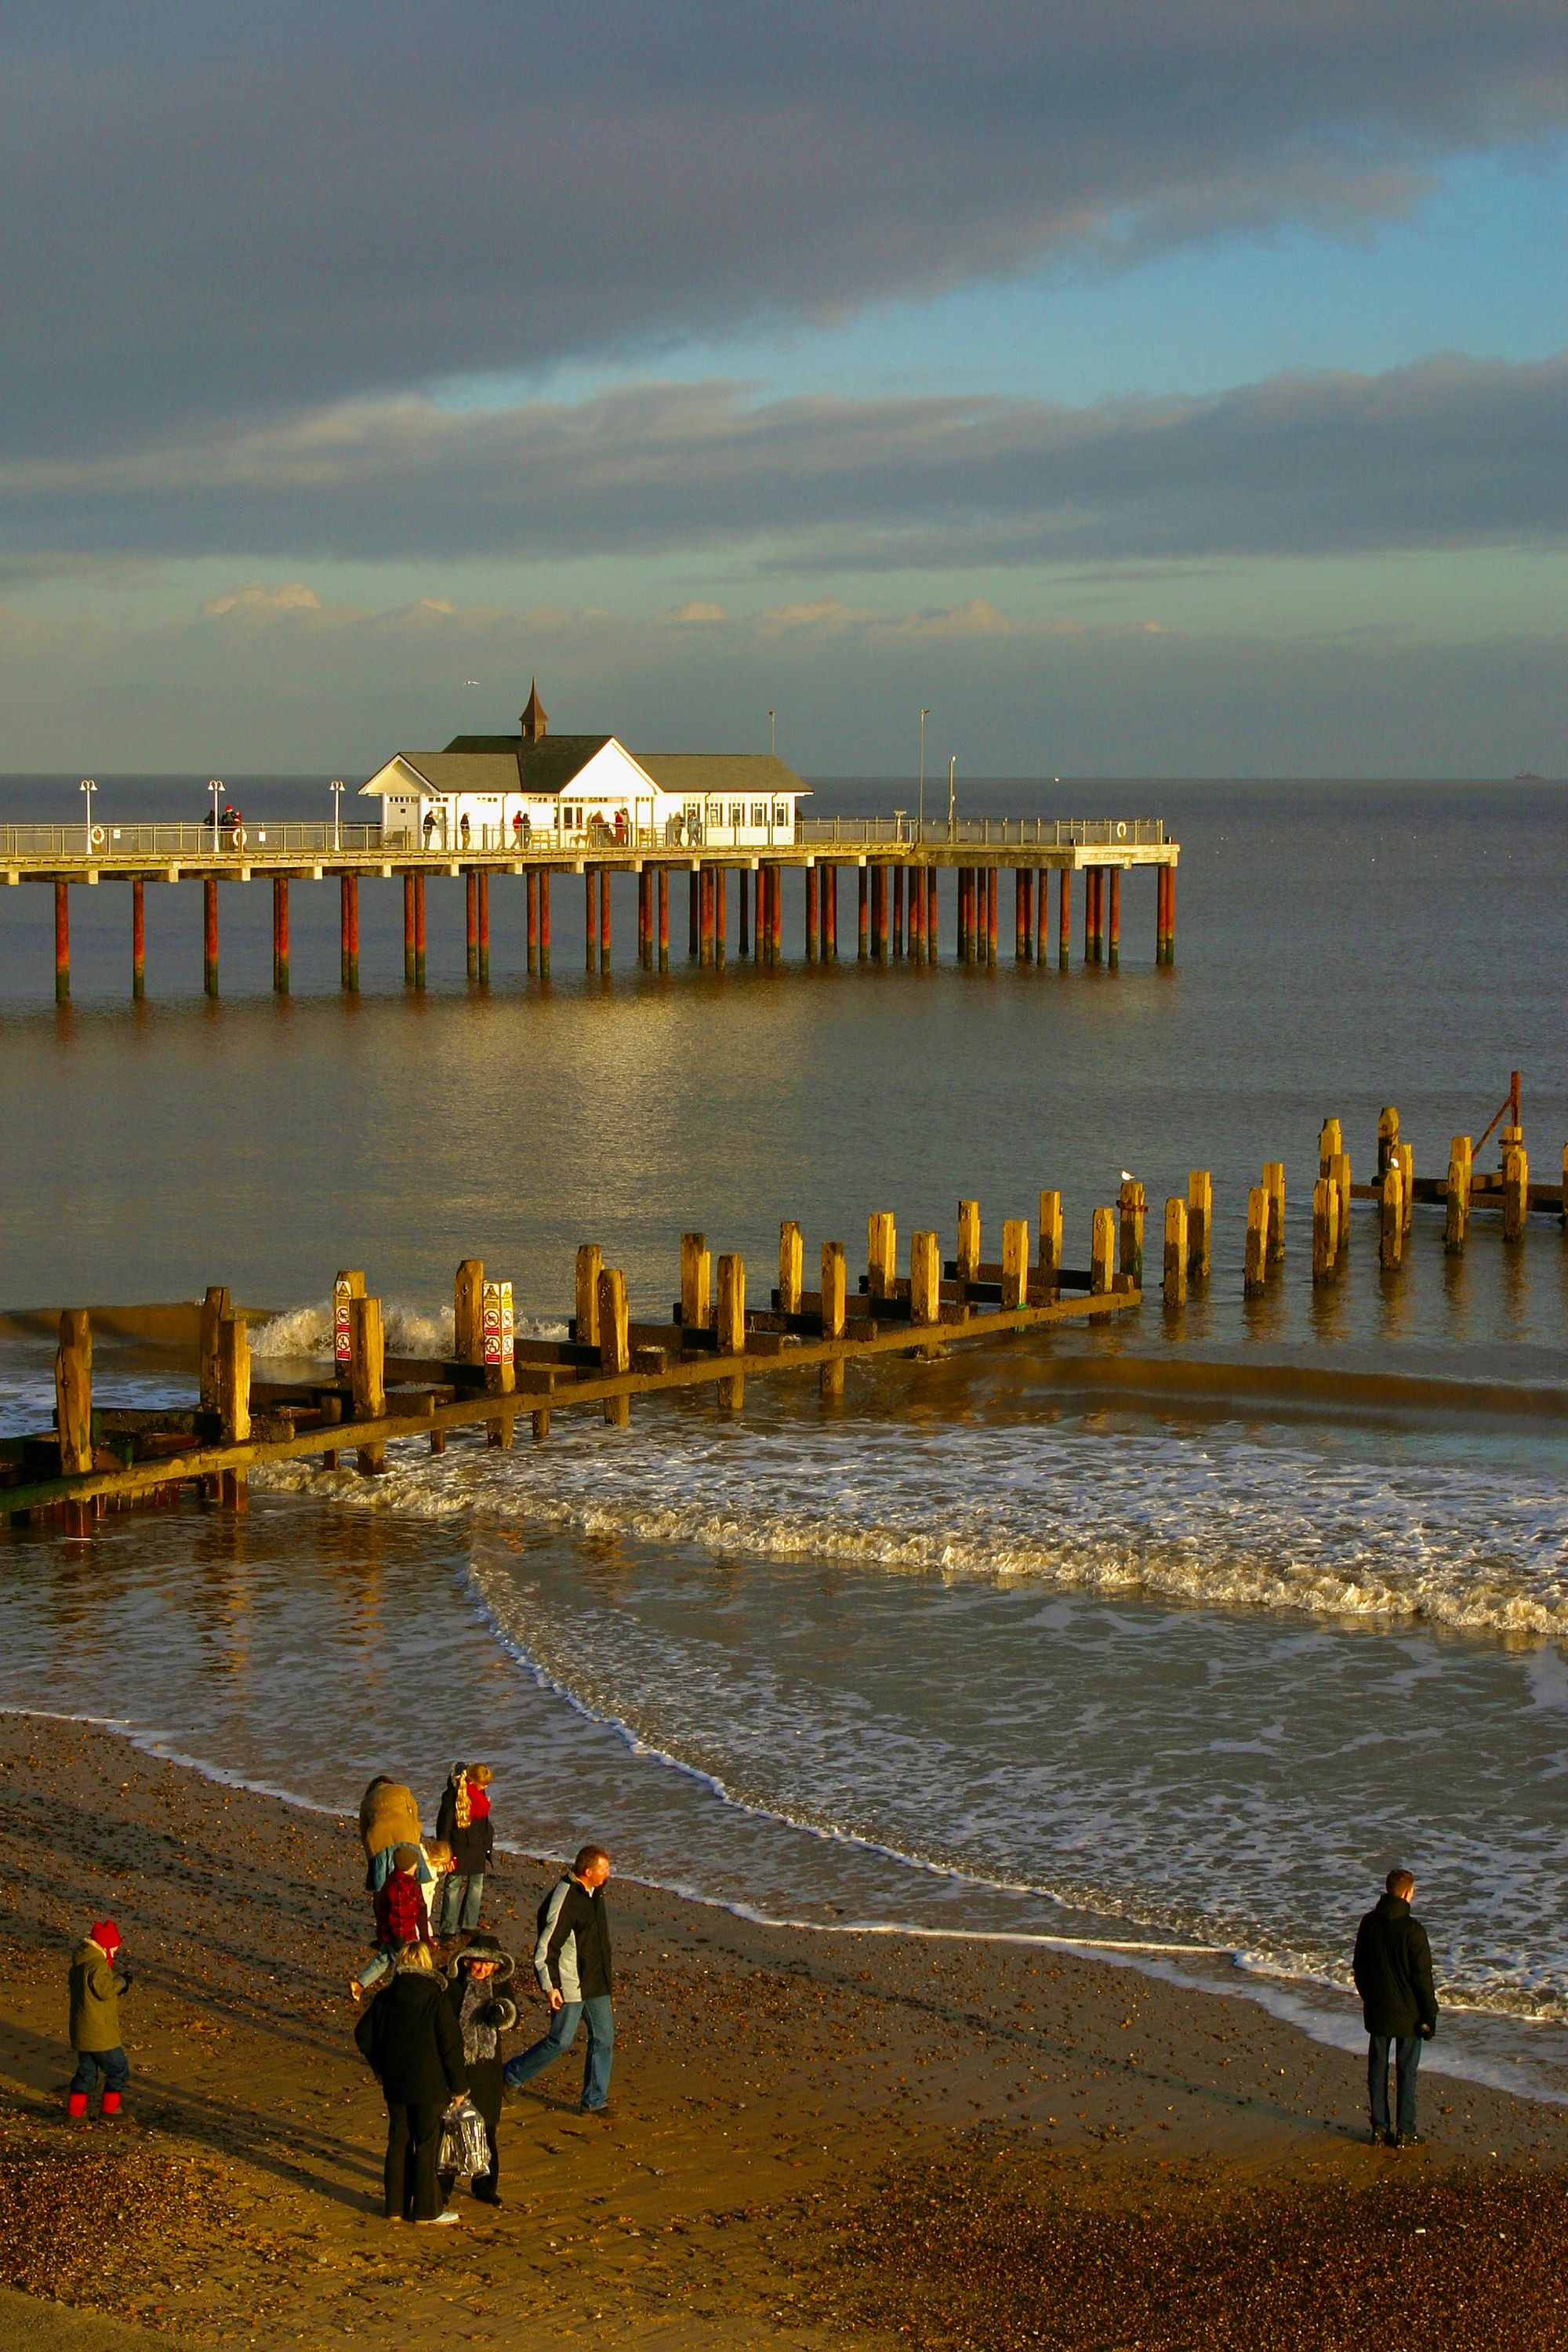 The Pier from Southwold on Boxing Day